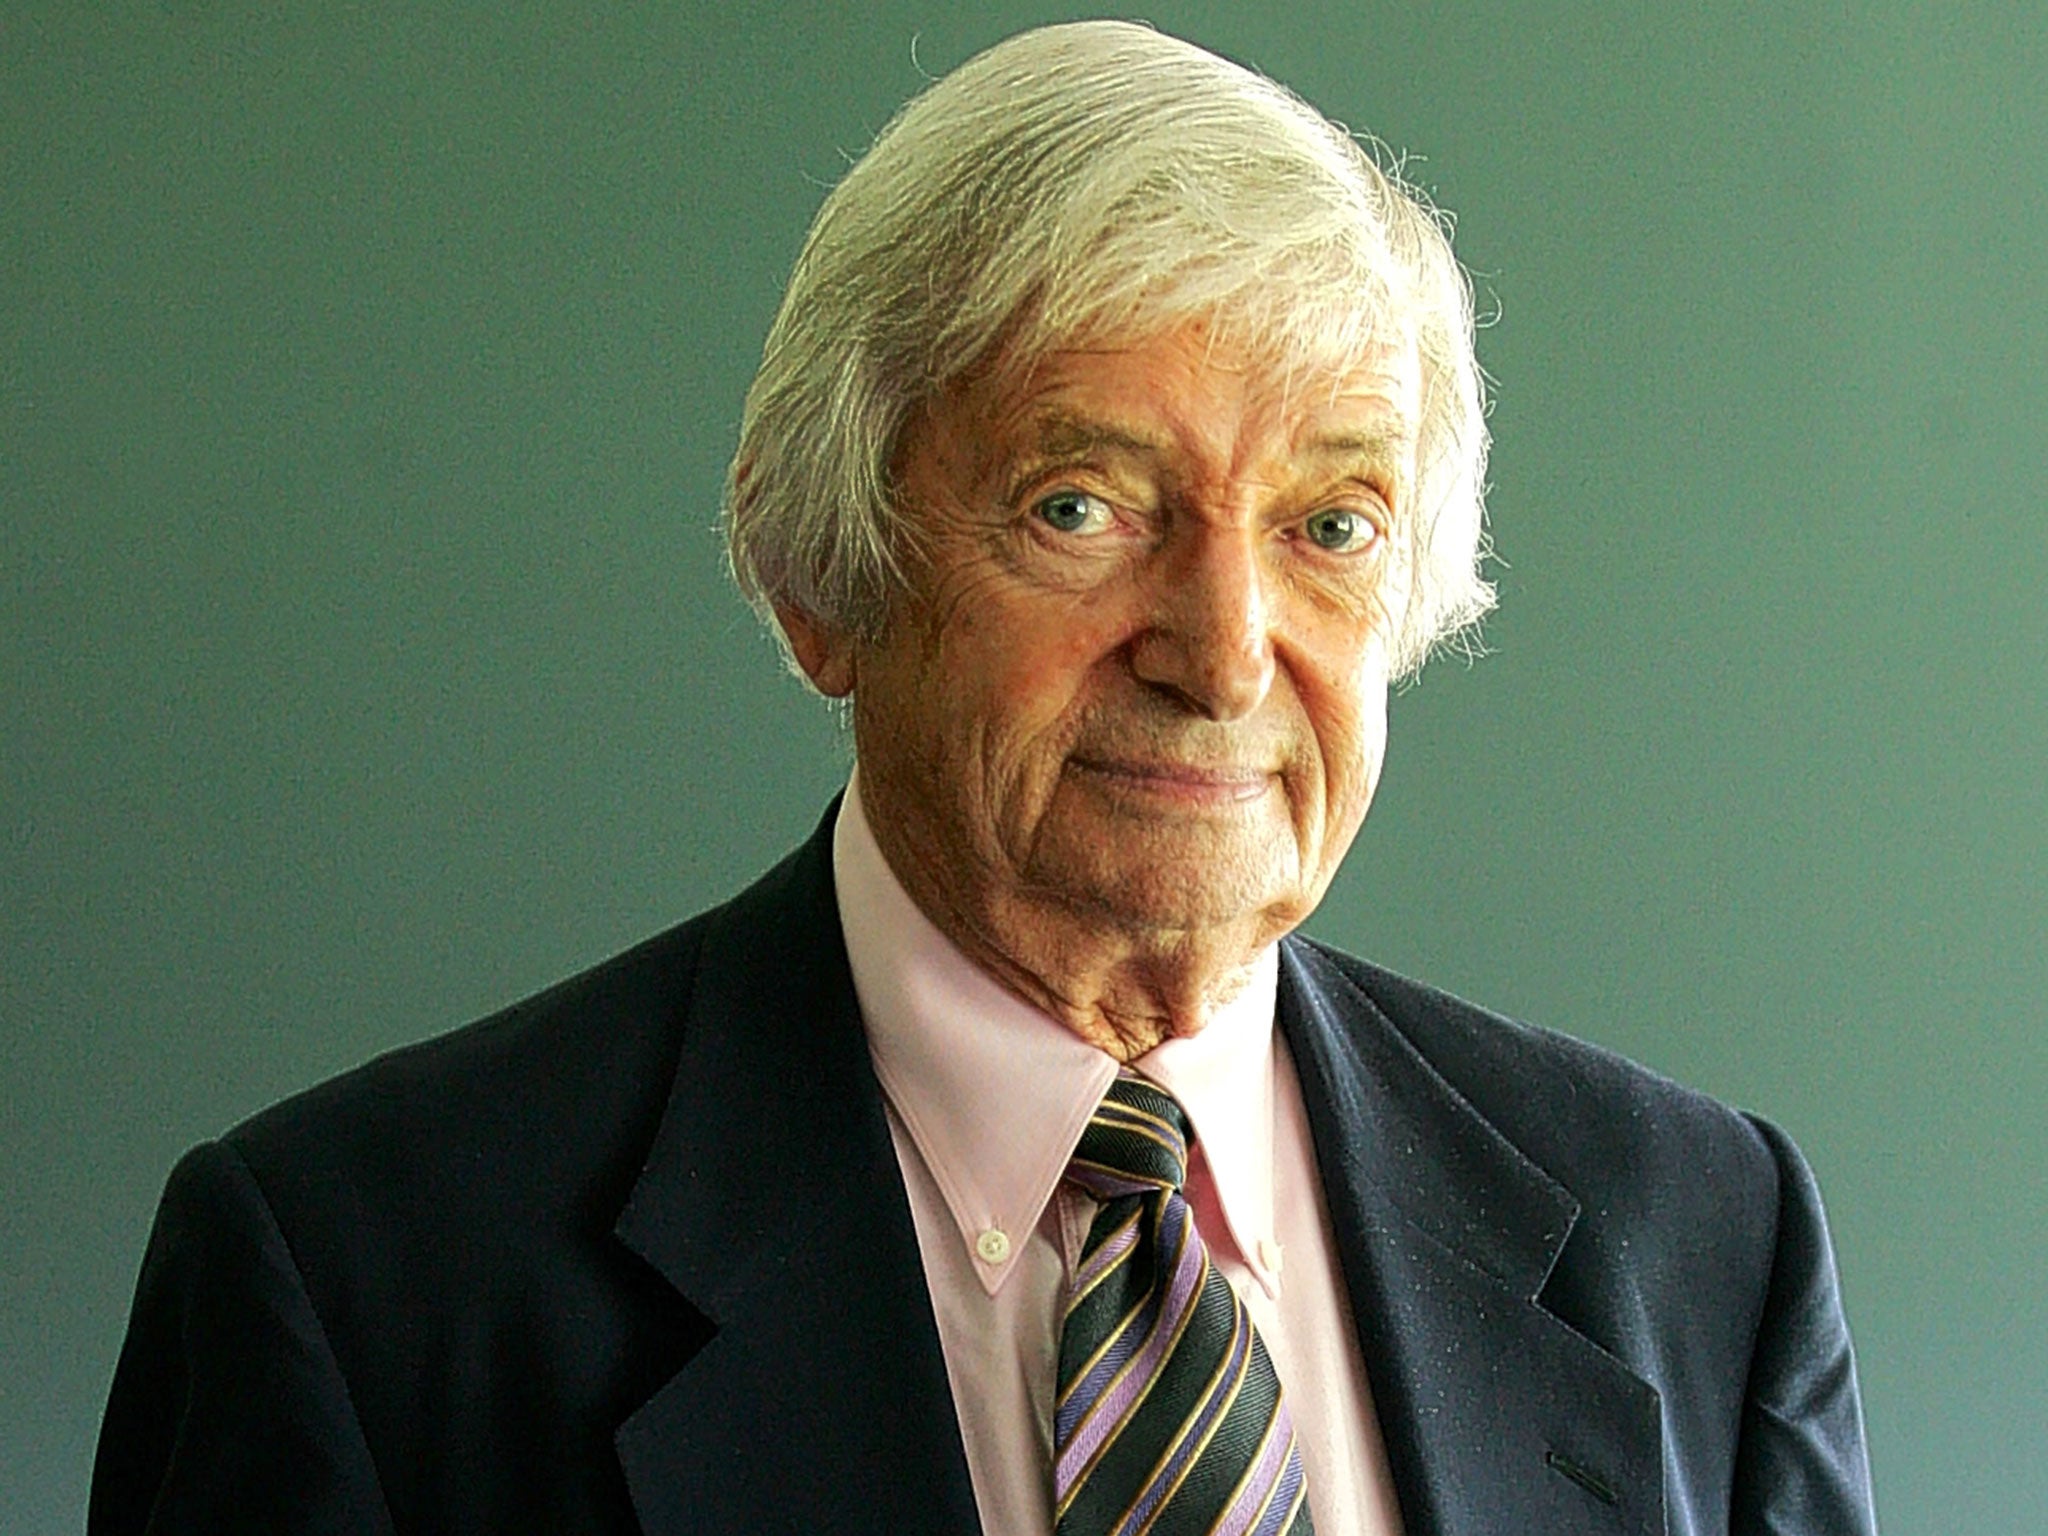 Richie Benaud’s style was wonderfully suited to cricket